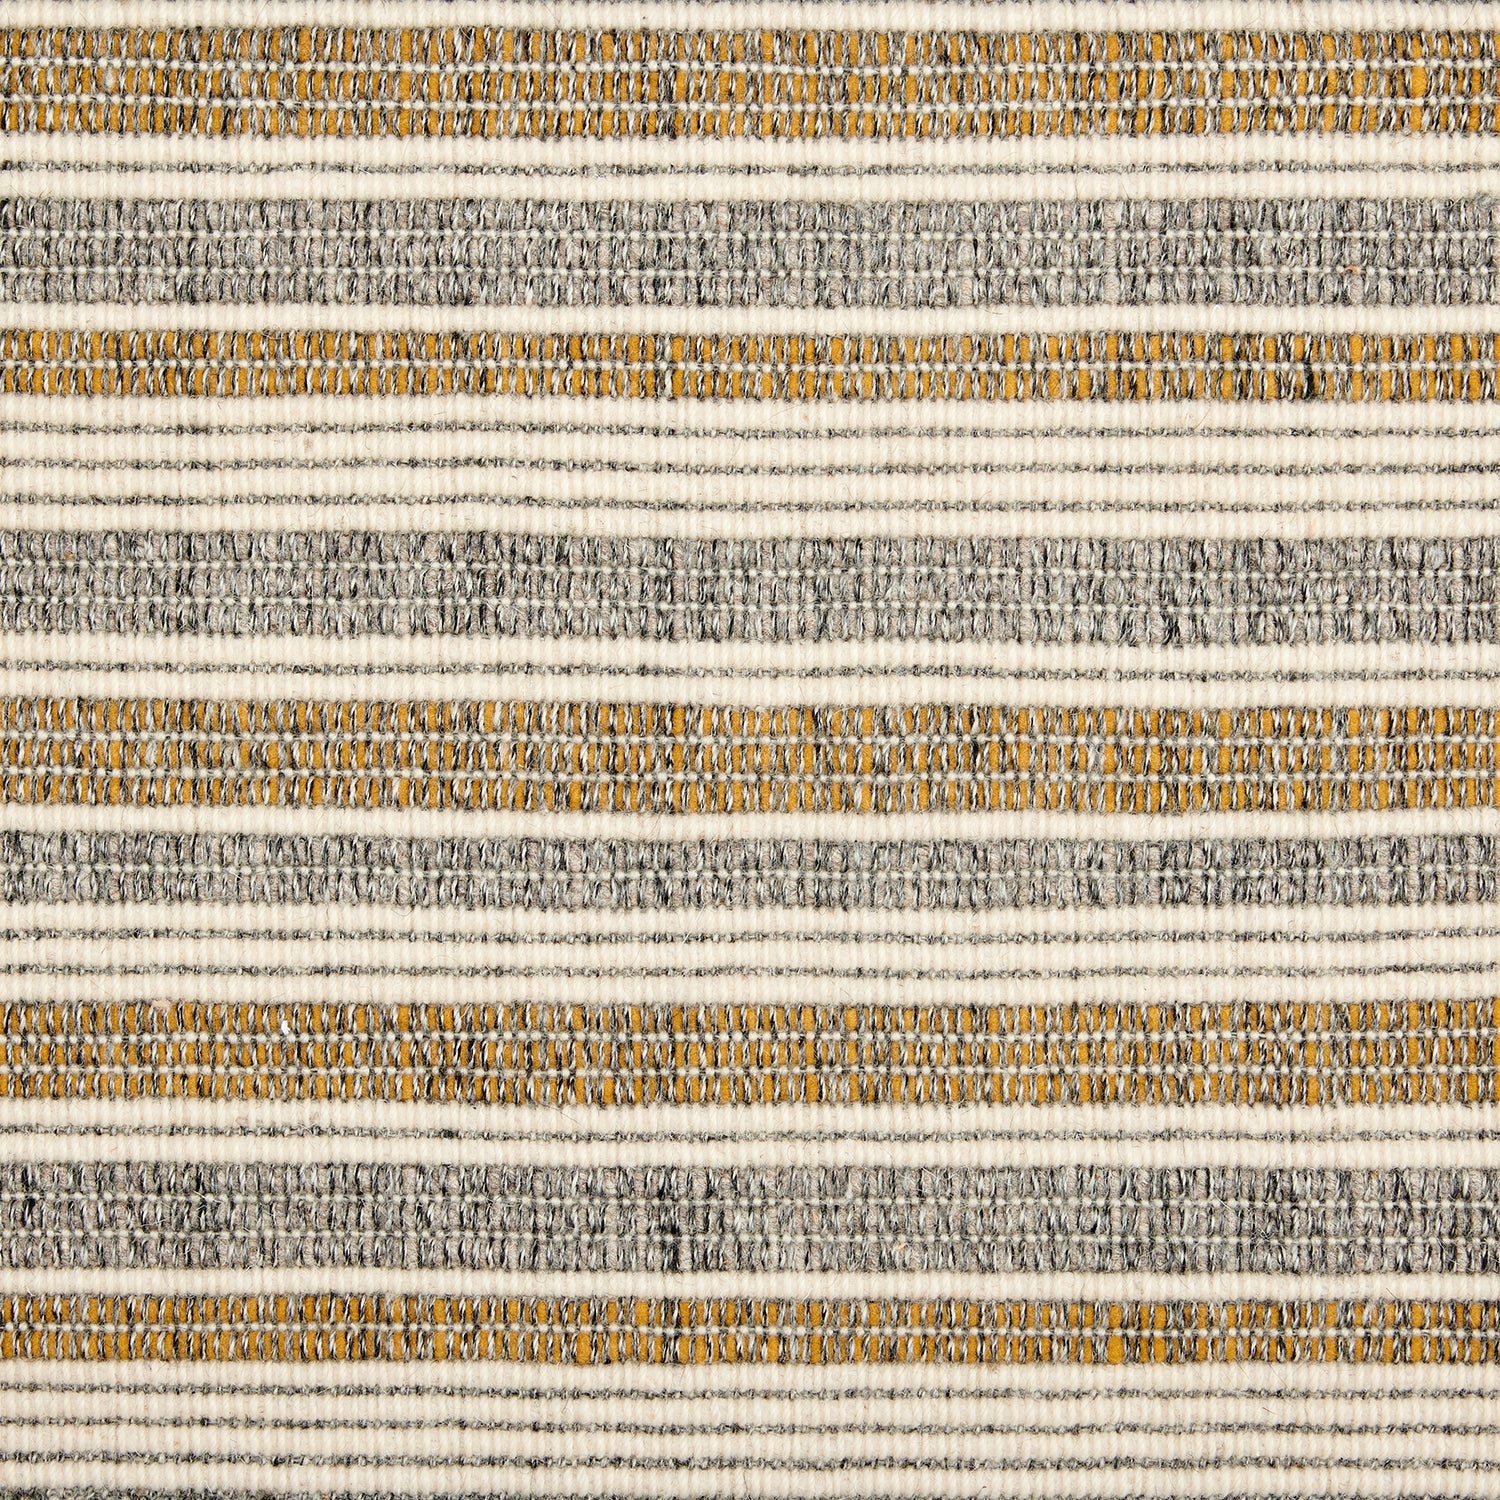 Wool broadloom carpet swatch in a ribbed stripe weave in gray, cream and tan.